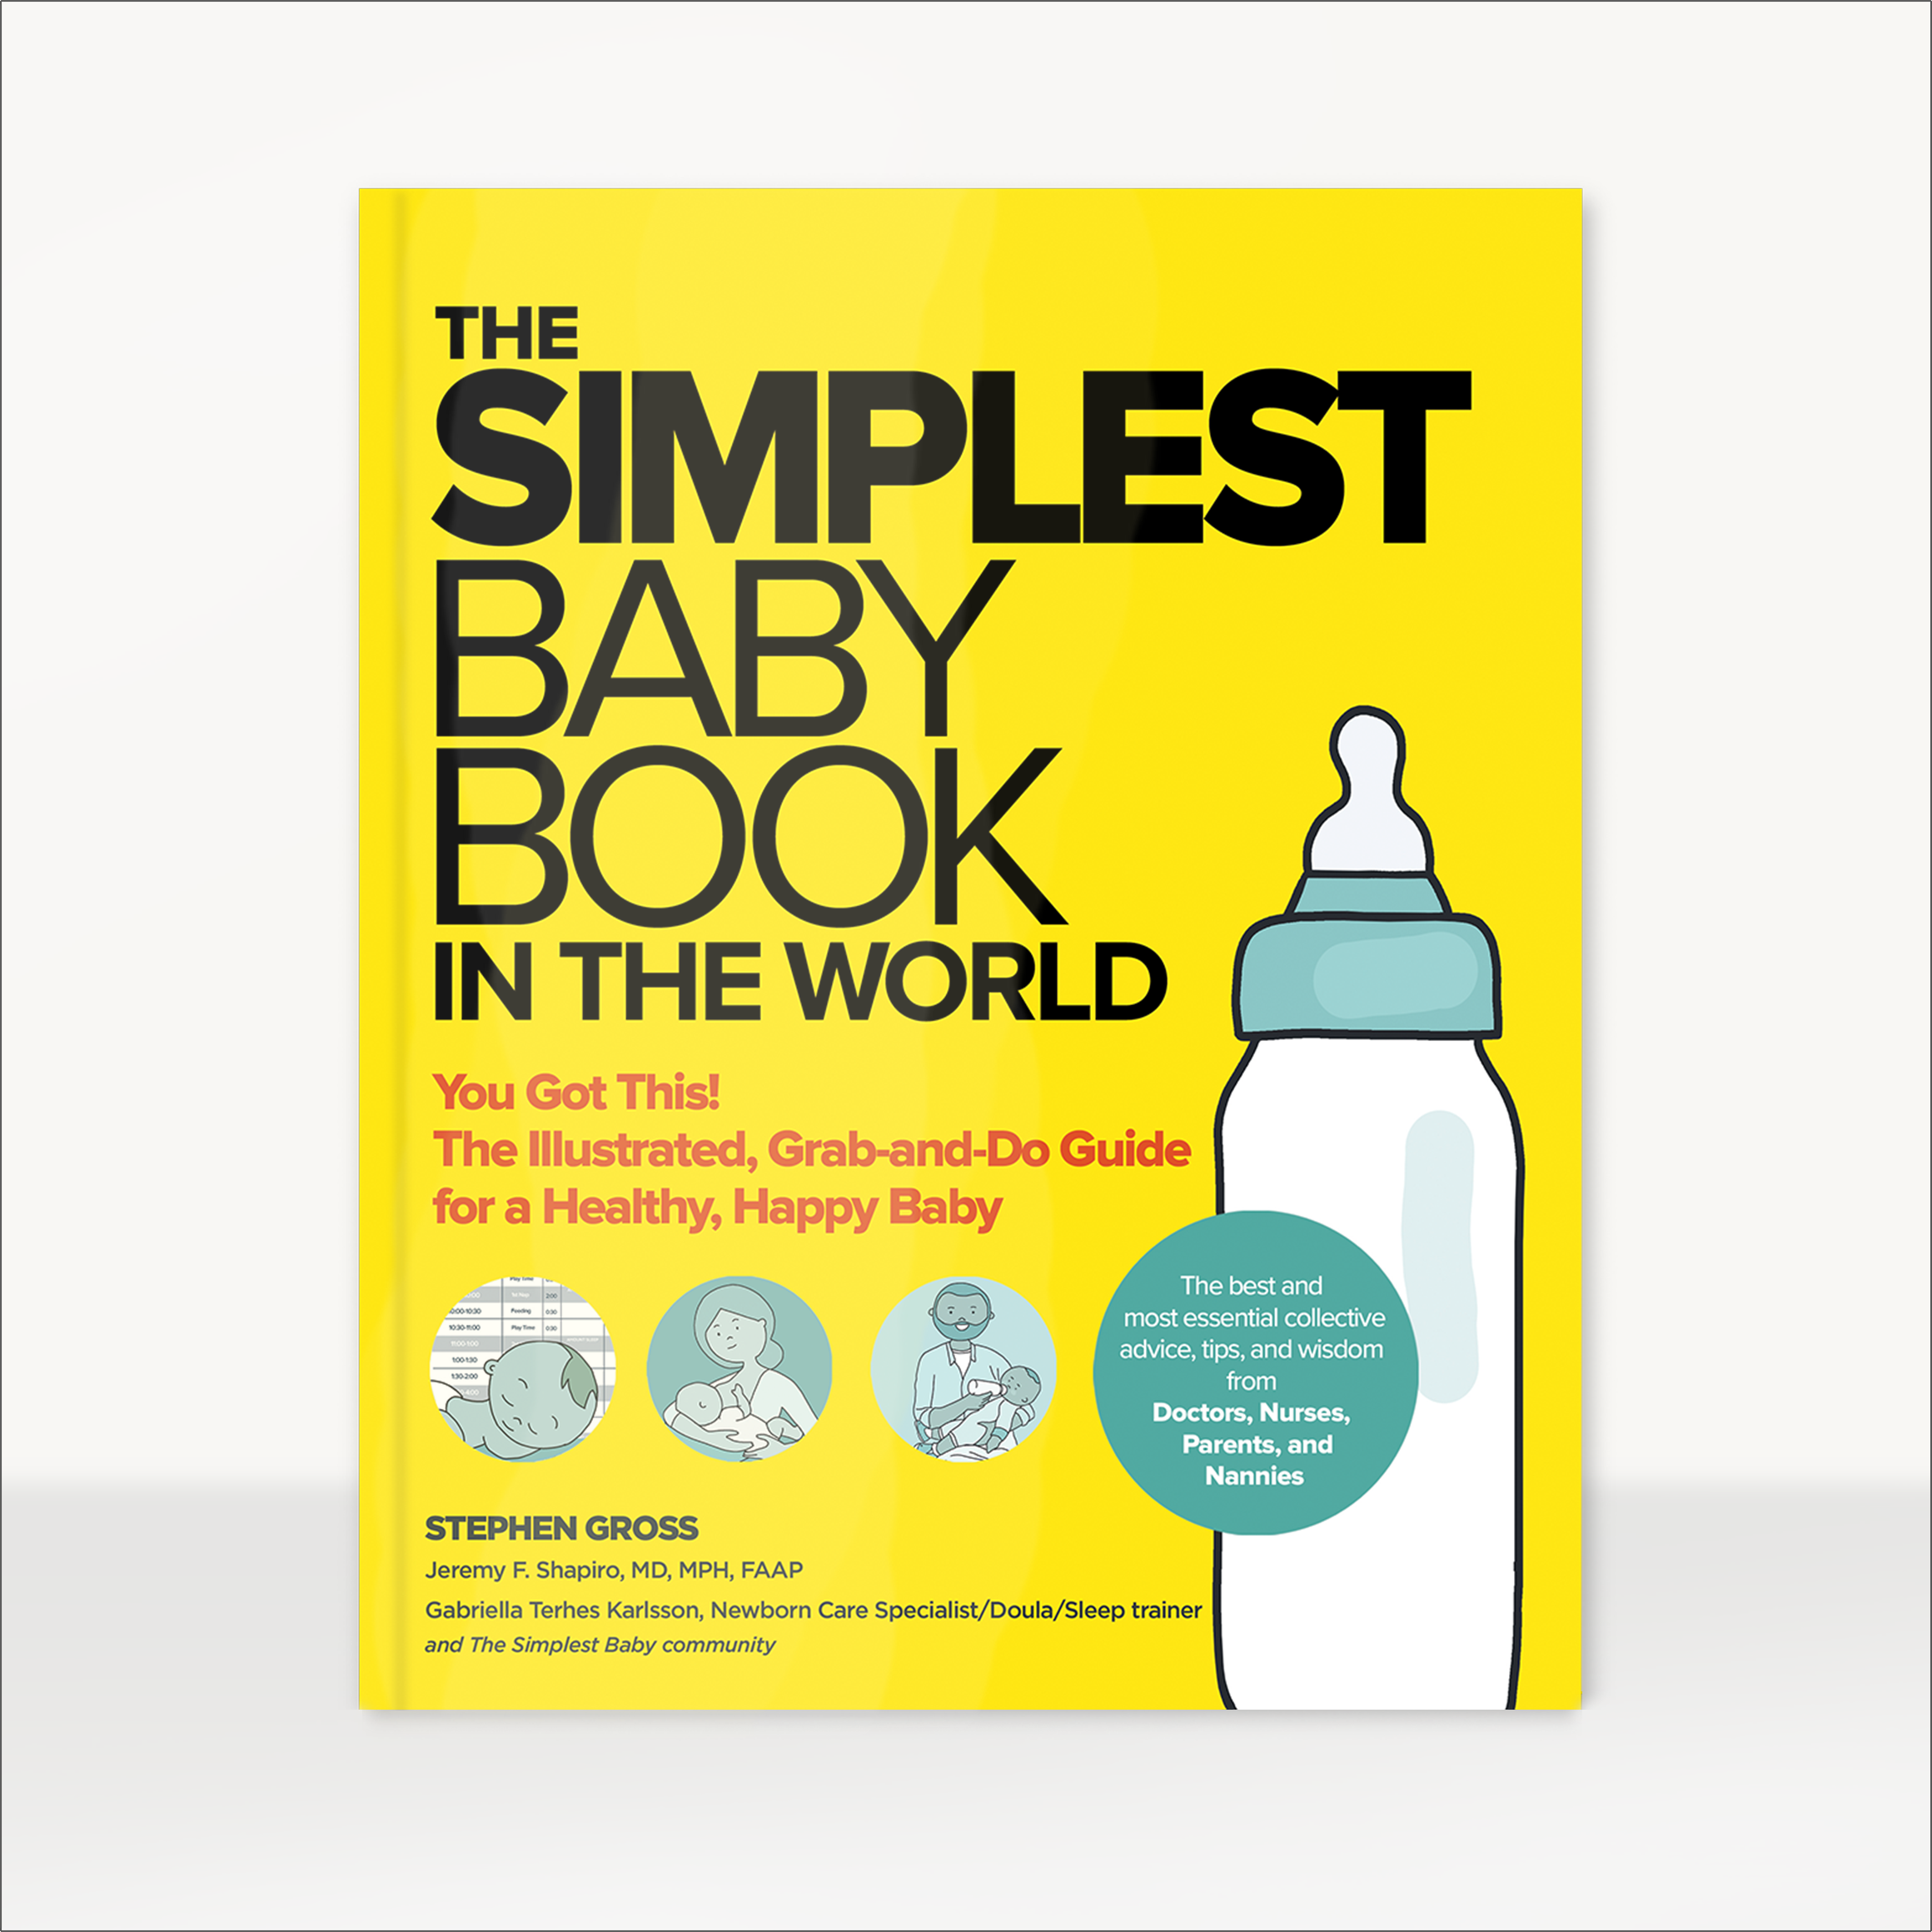 The Simplest Baby Book in The World - Simplest Baby